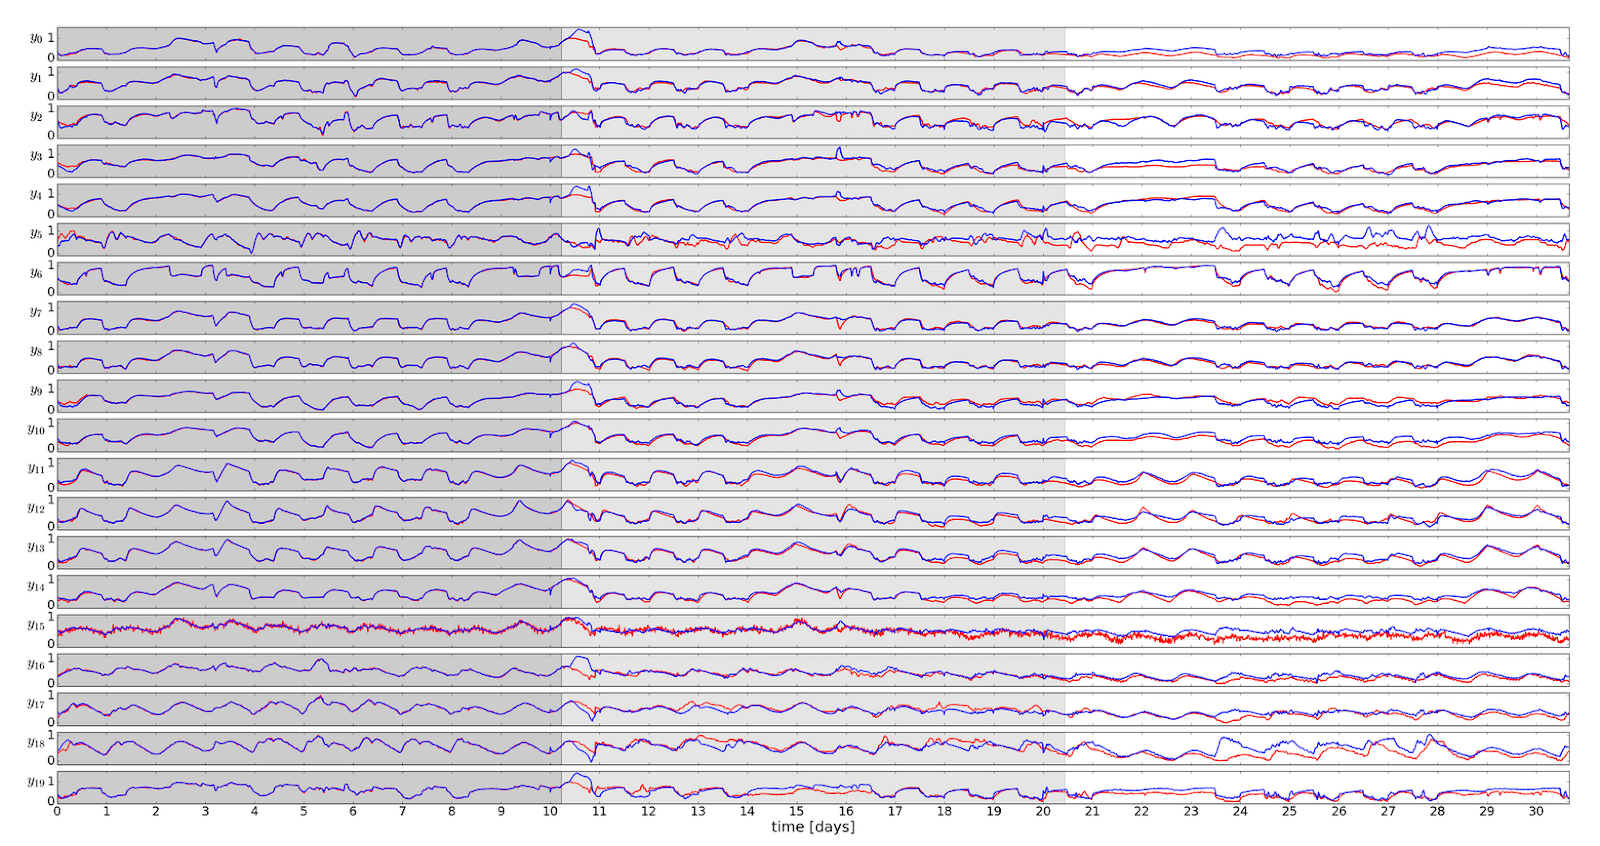 Plots of trajectories of building dynamics showing closely matched red and blue lines for many variables over a 30-day period